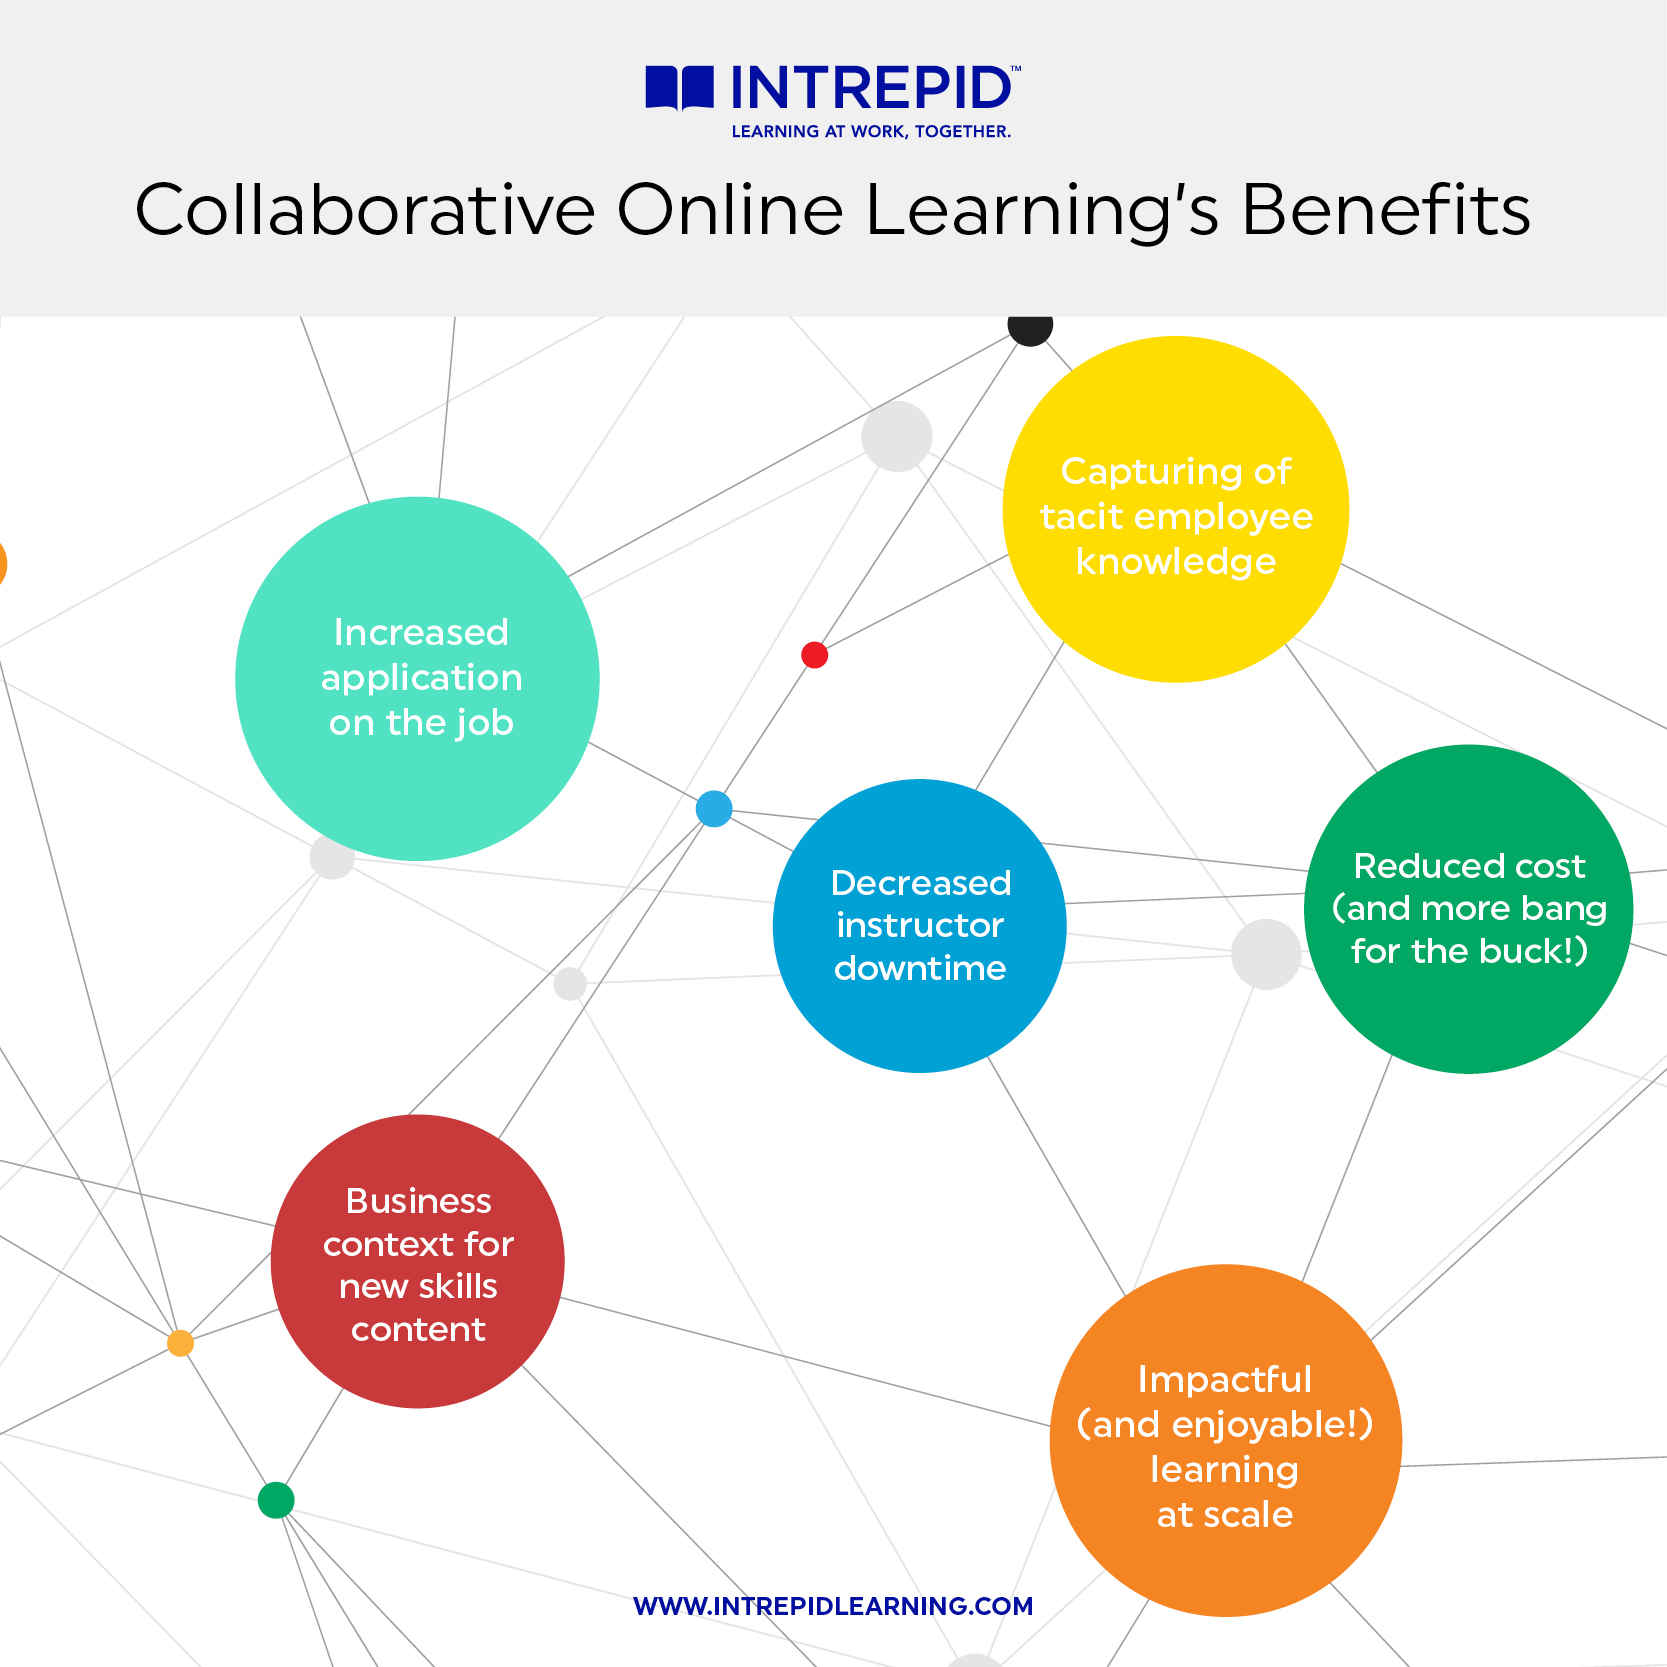 a case study of online collaborative learning